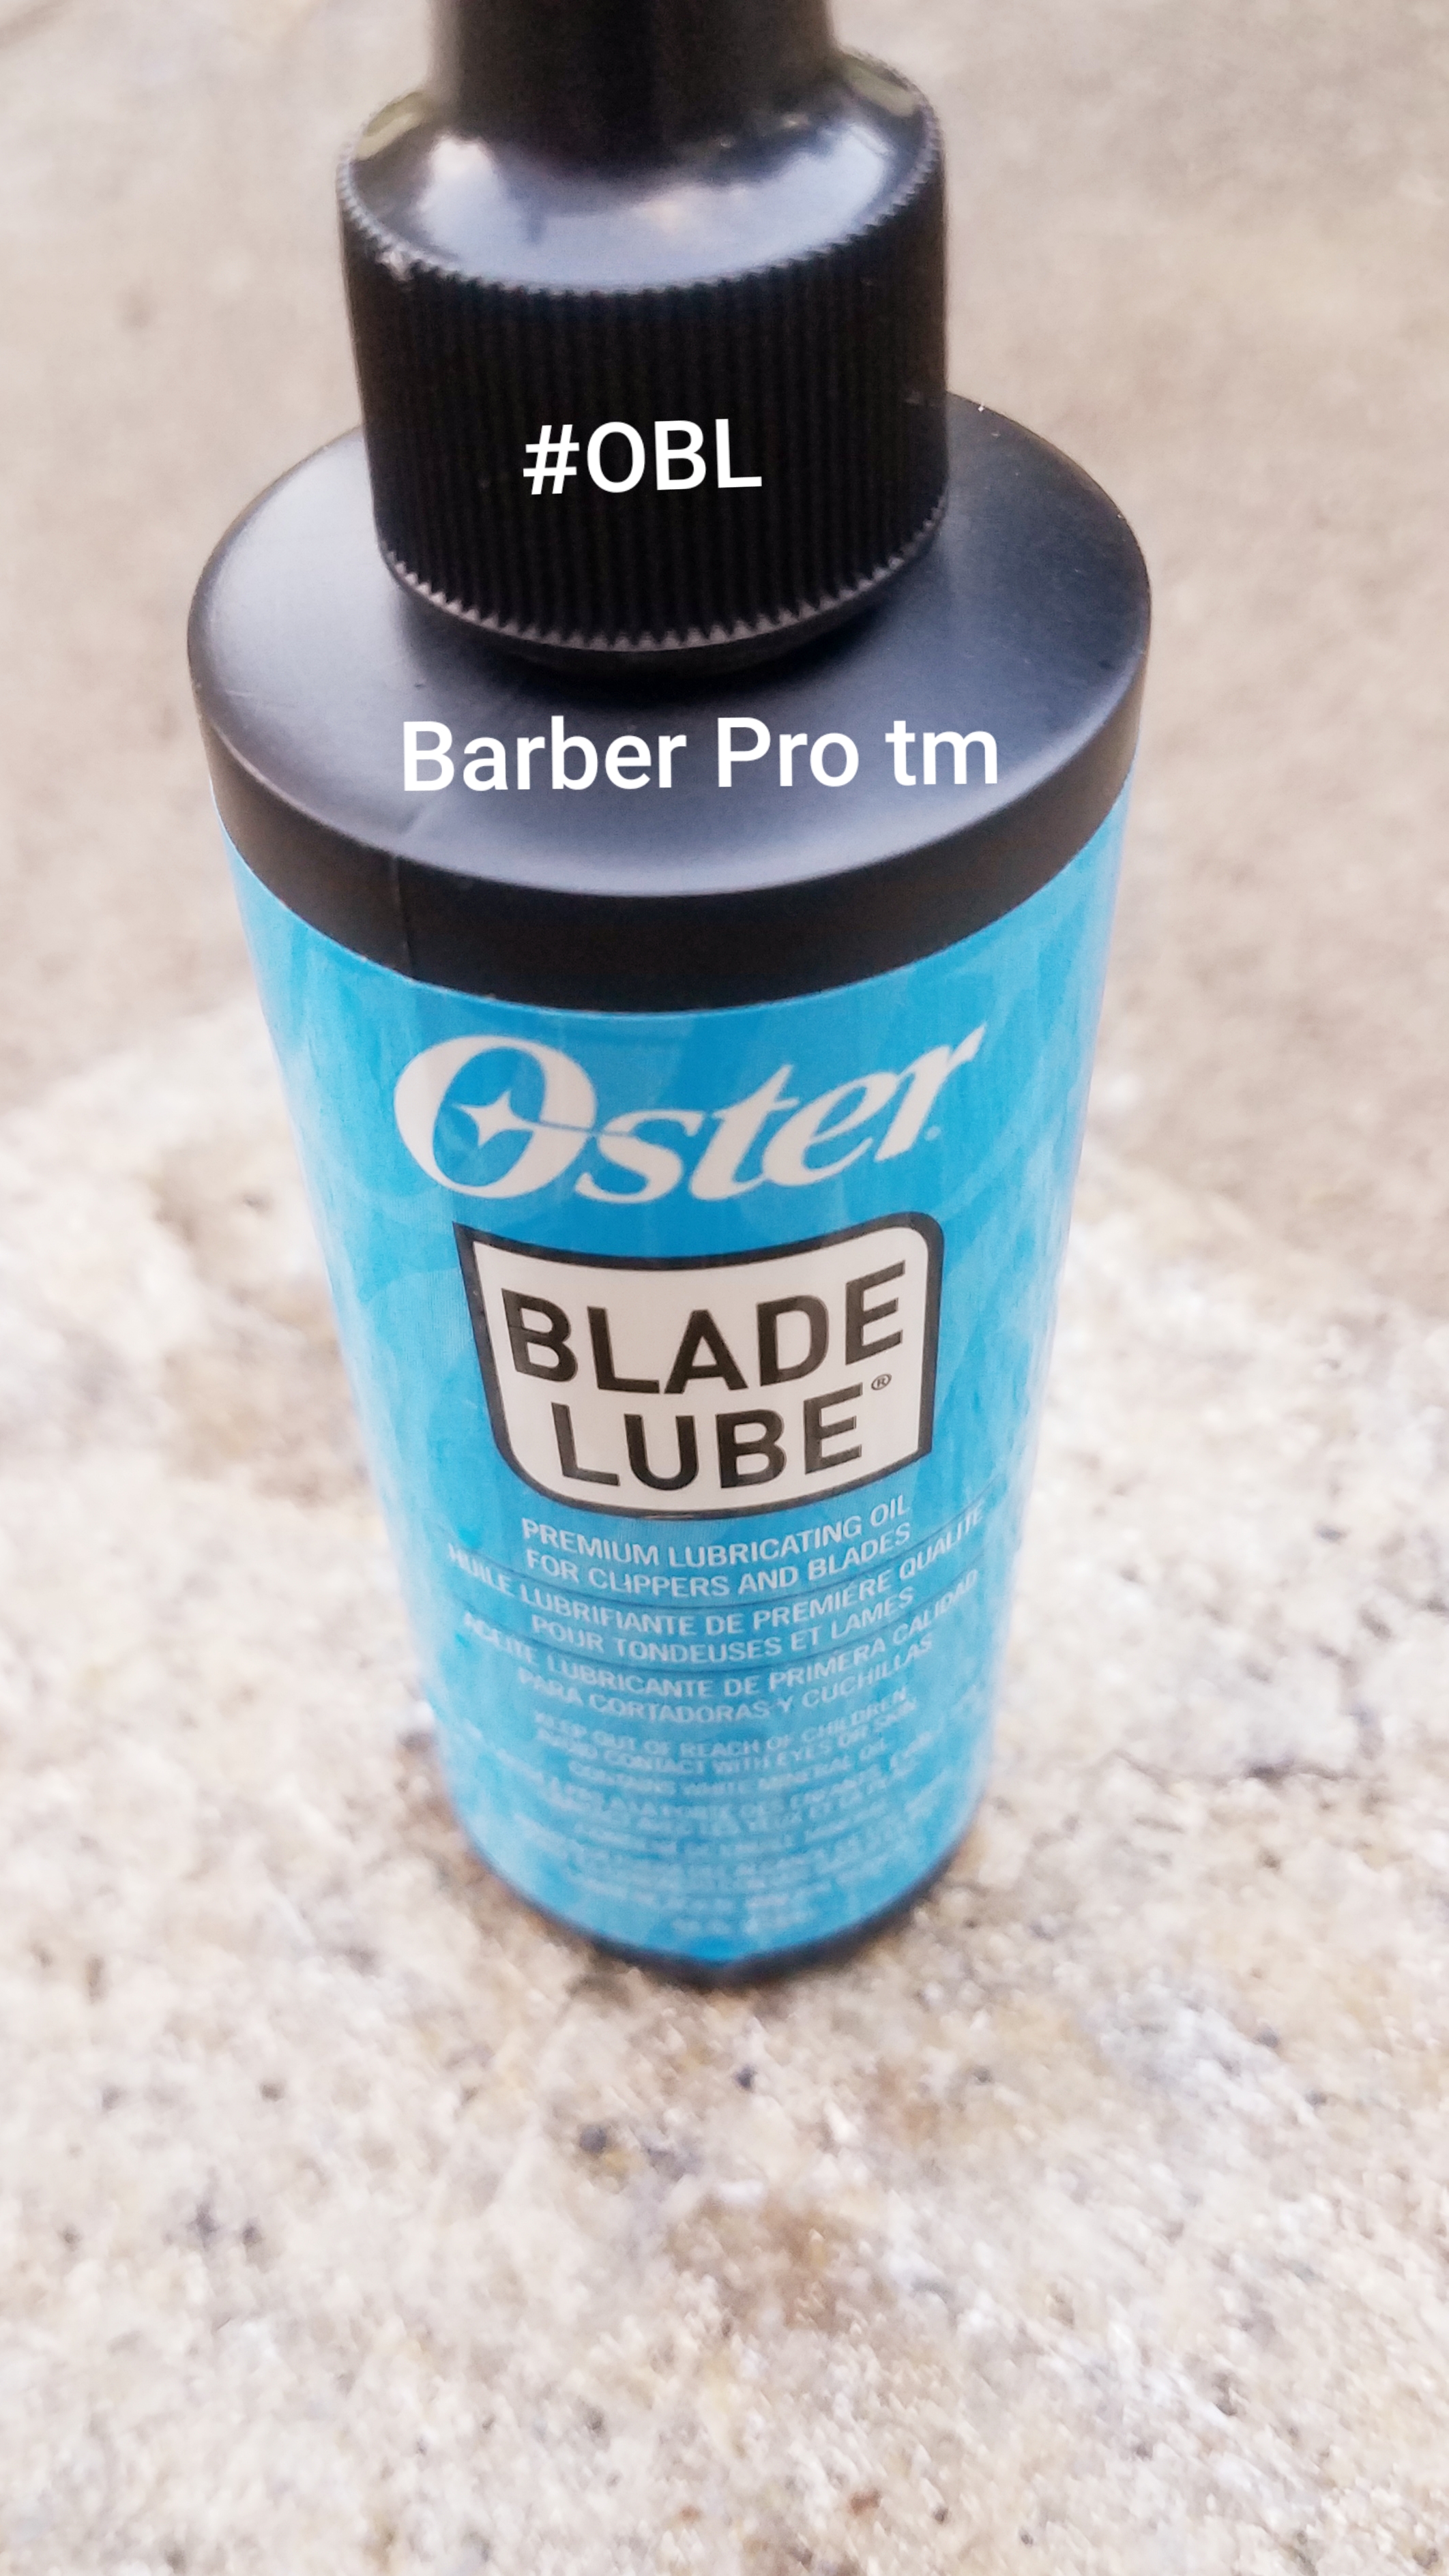 #OBL CLIPPER OIL FROM BARBER PRO tm POLLY PRODUCTS, MADE IN THE USA